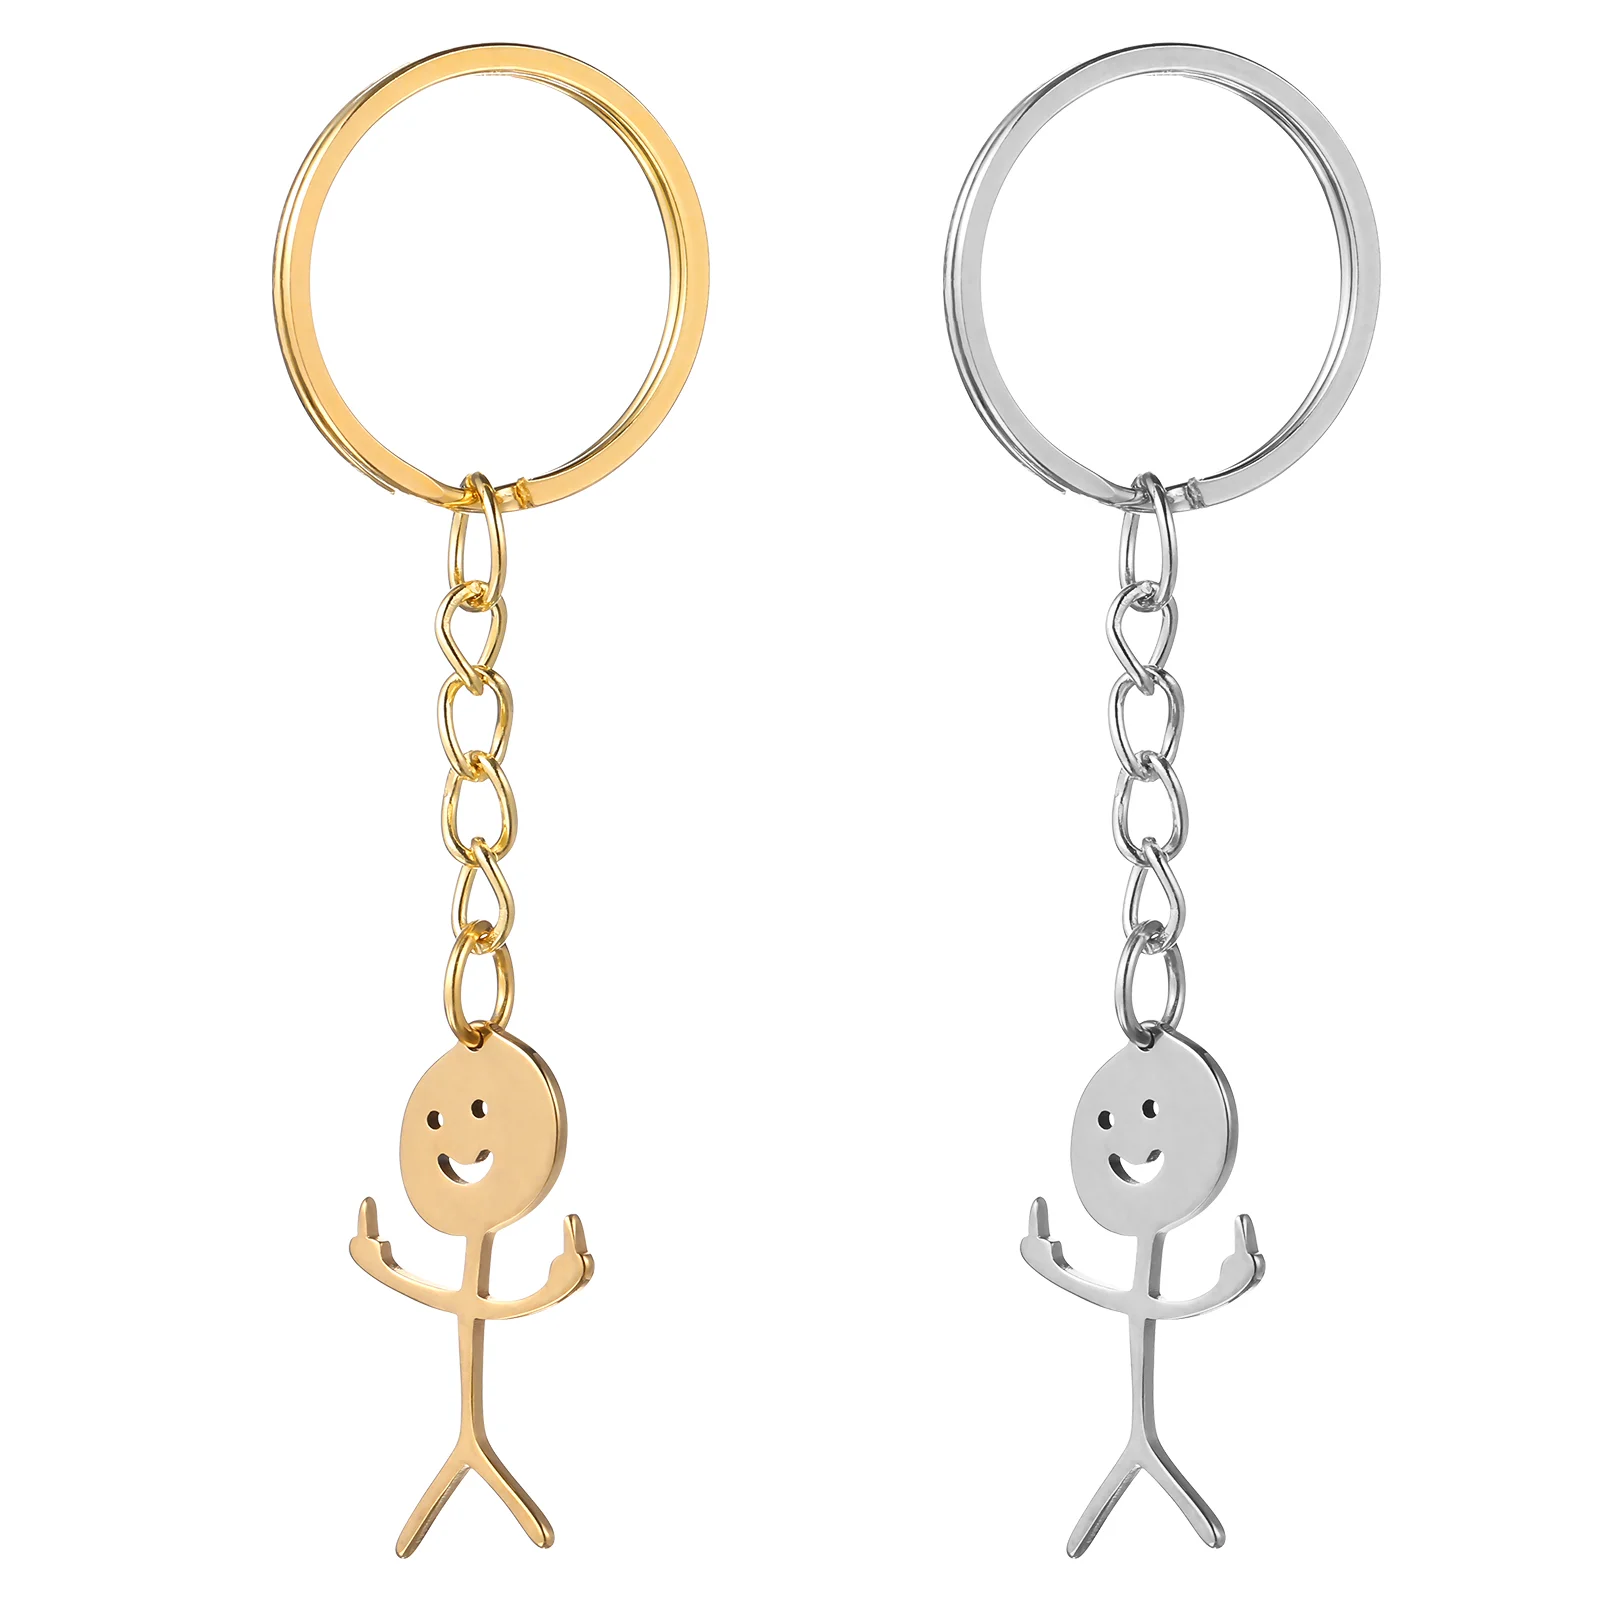 

2 Pcs Stainless Steel Key Chain Pendant Miss Keychain Metal Keychains For Women